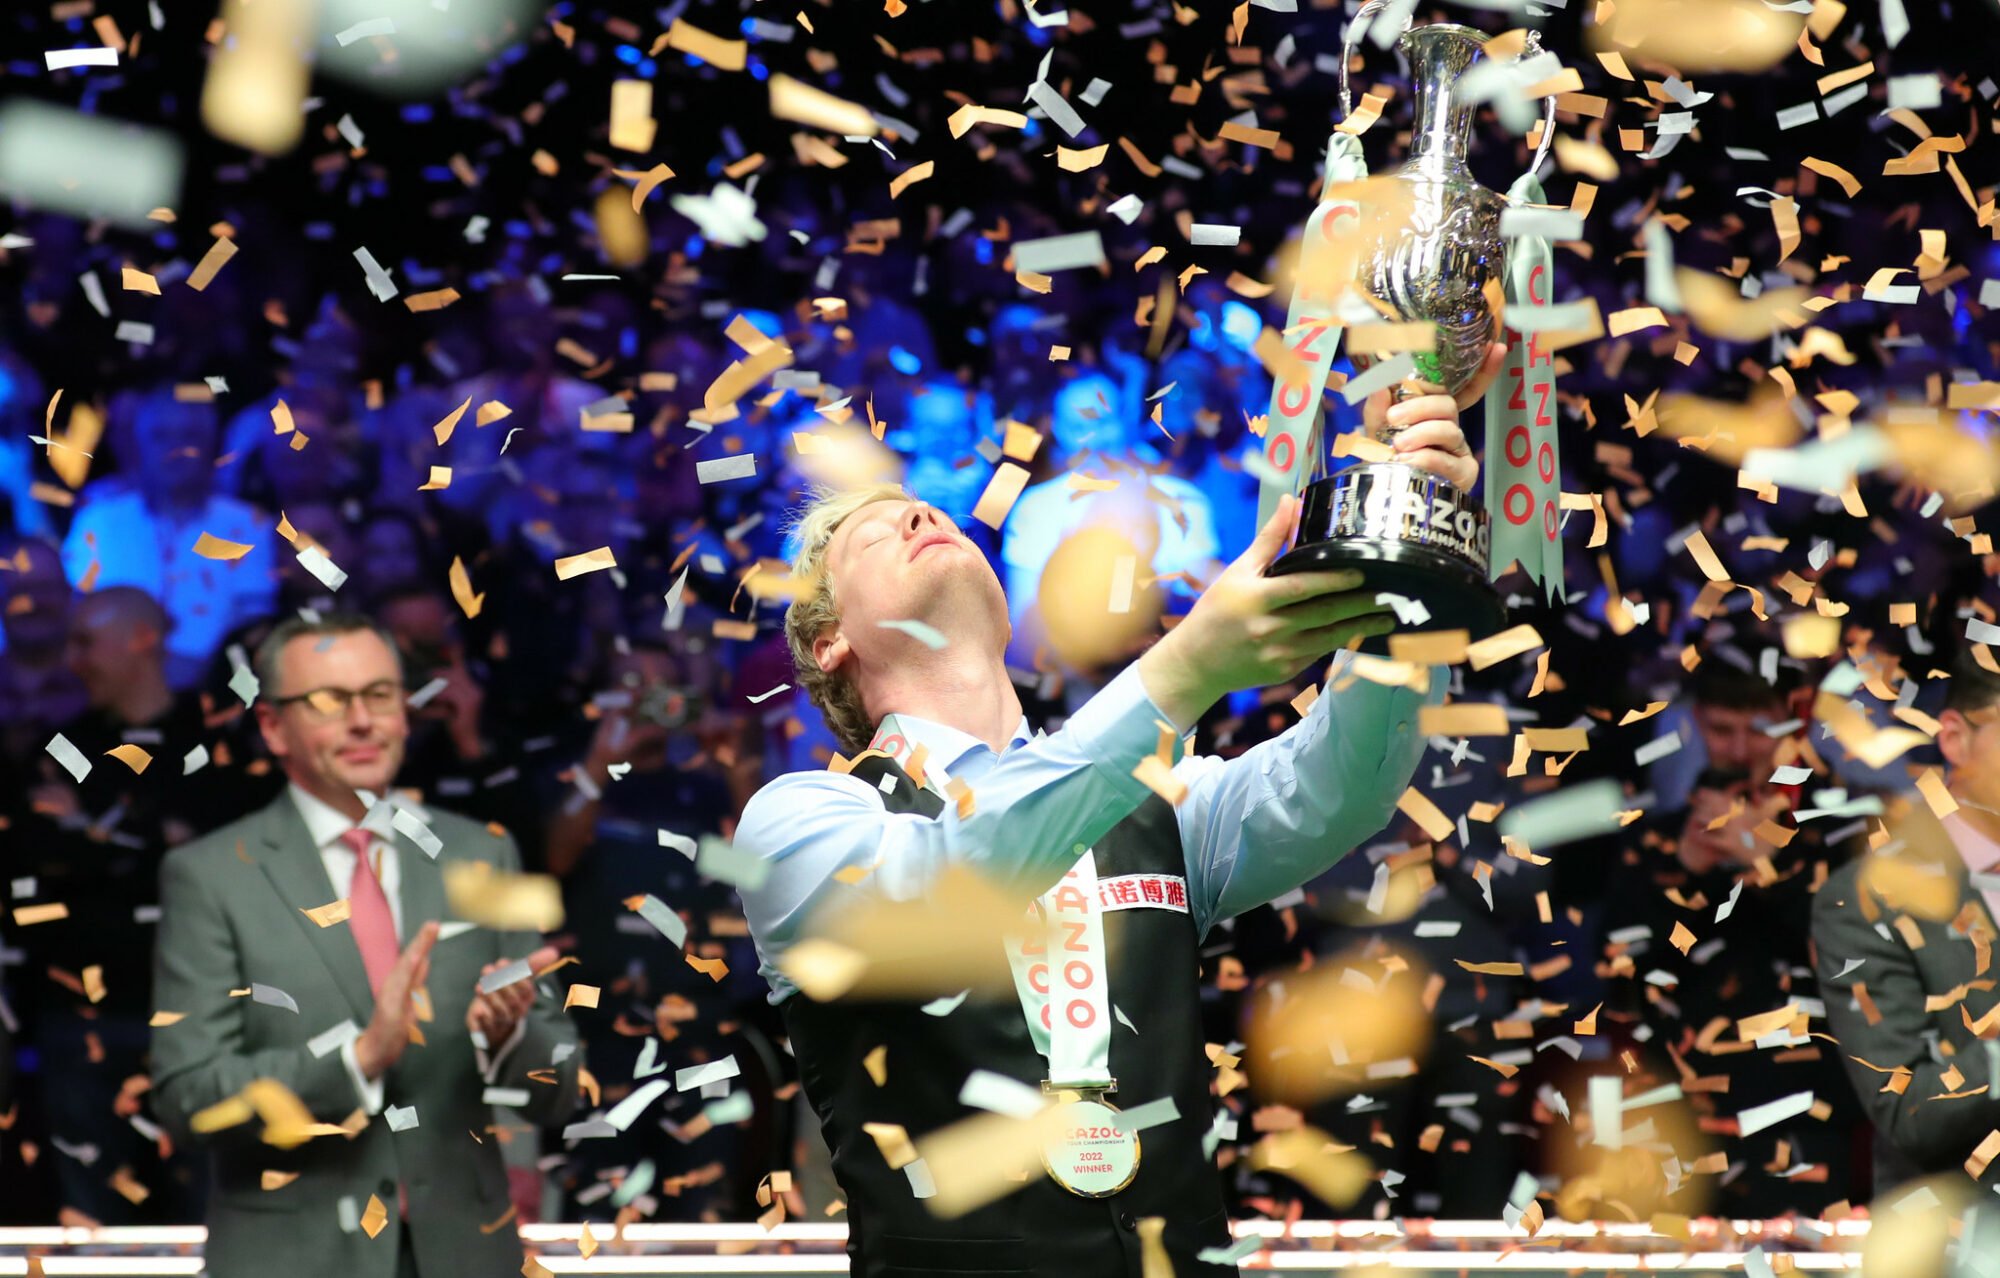 Image name neil robertson winning the snooker tour championship the 10 image from the post Snooker Tour Championship coming to Hull in 2023 in Yorkshire.com.